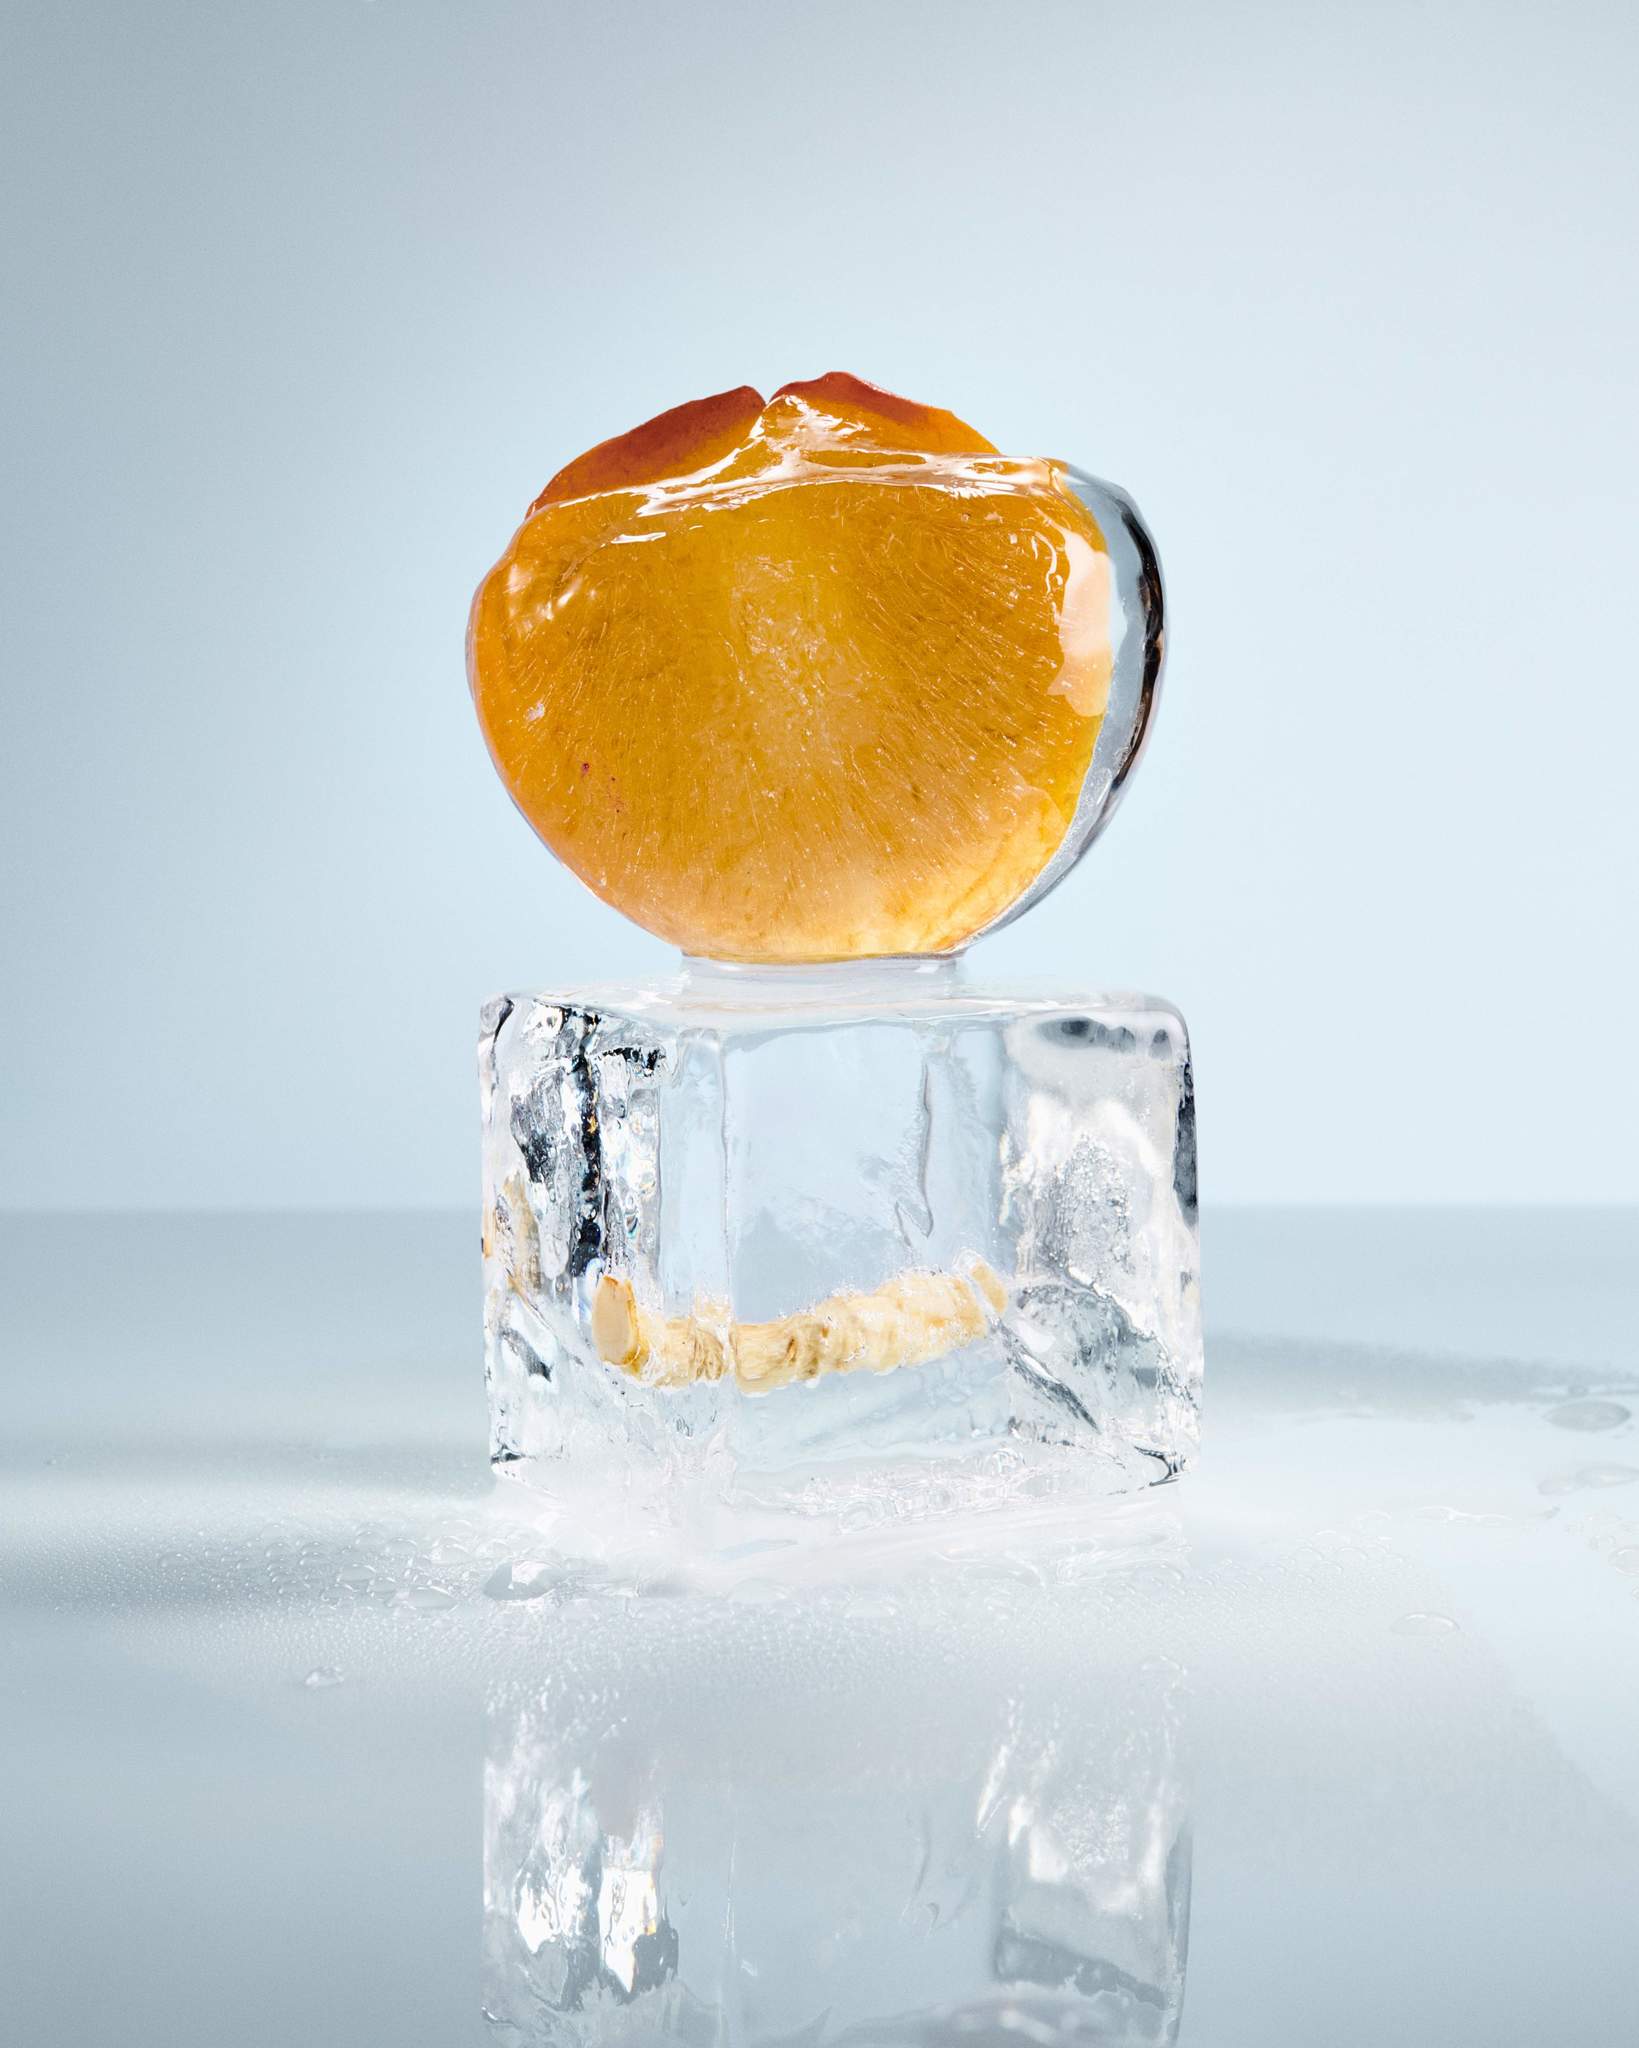 Sliced apricot perched on a clear, melting ice cube, with reflections and water droplets on a light blue backdrop.